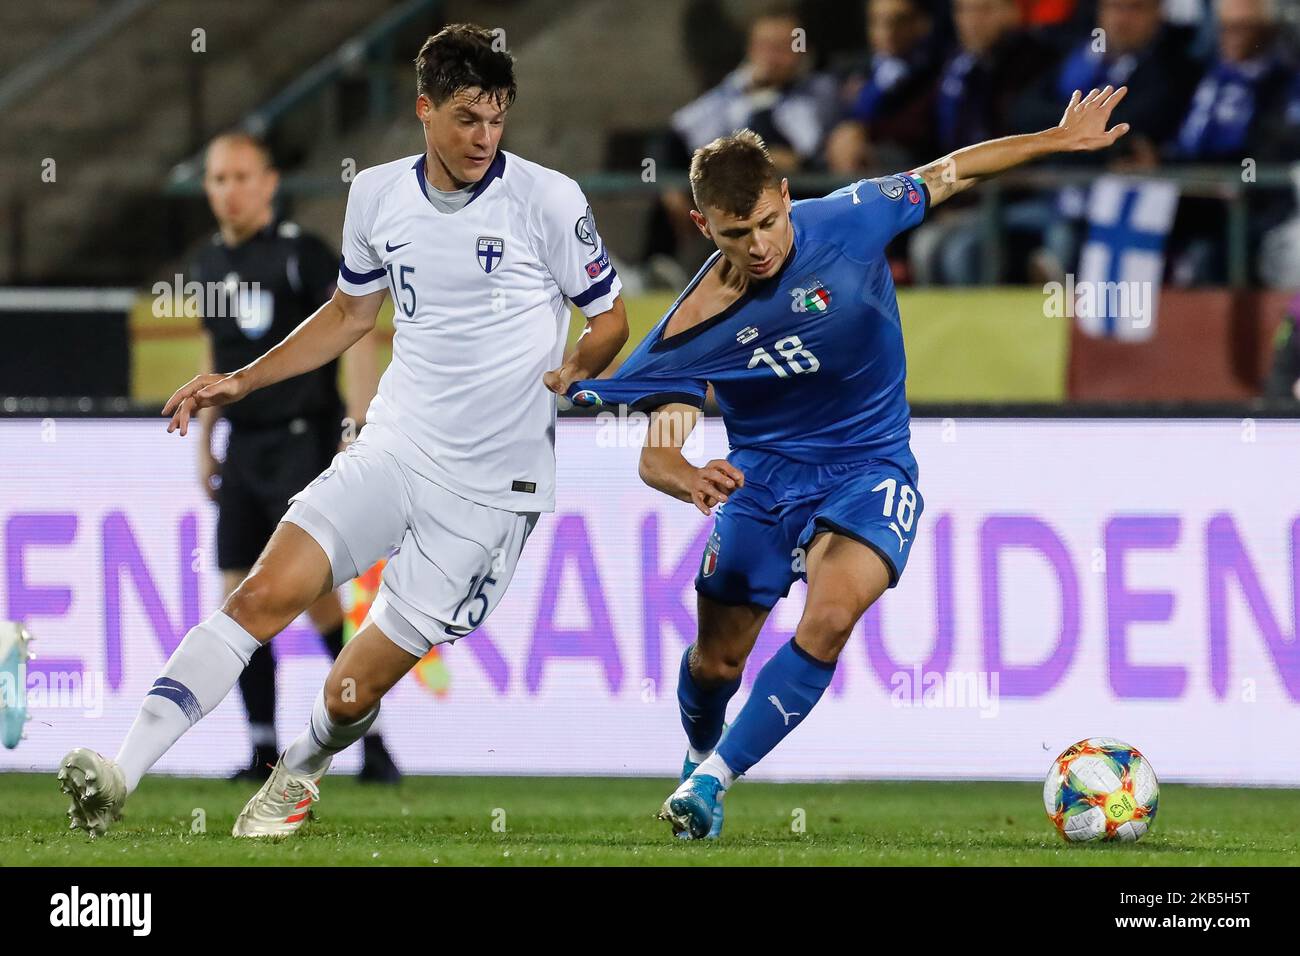 Sauli Vaisanen (L) of Finland and Nicolo Barella of Italy vie for the ball during UEFA Euro 2020 qualifying match between Finland and Italy on September 8, 2019 at Ratina Stadium in Tampere, Finland. (Photo by Mike Kireev/NurPhoto) Stock Photo